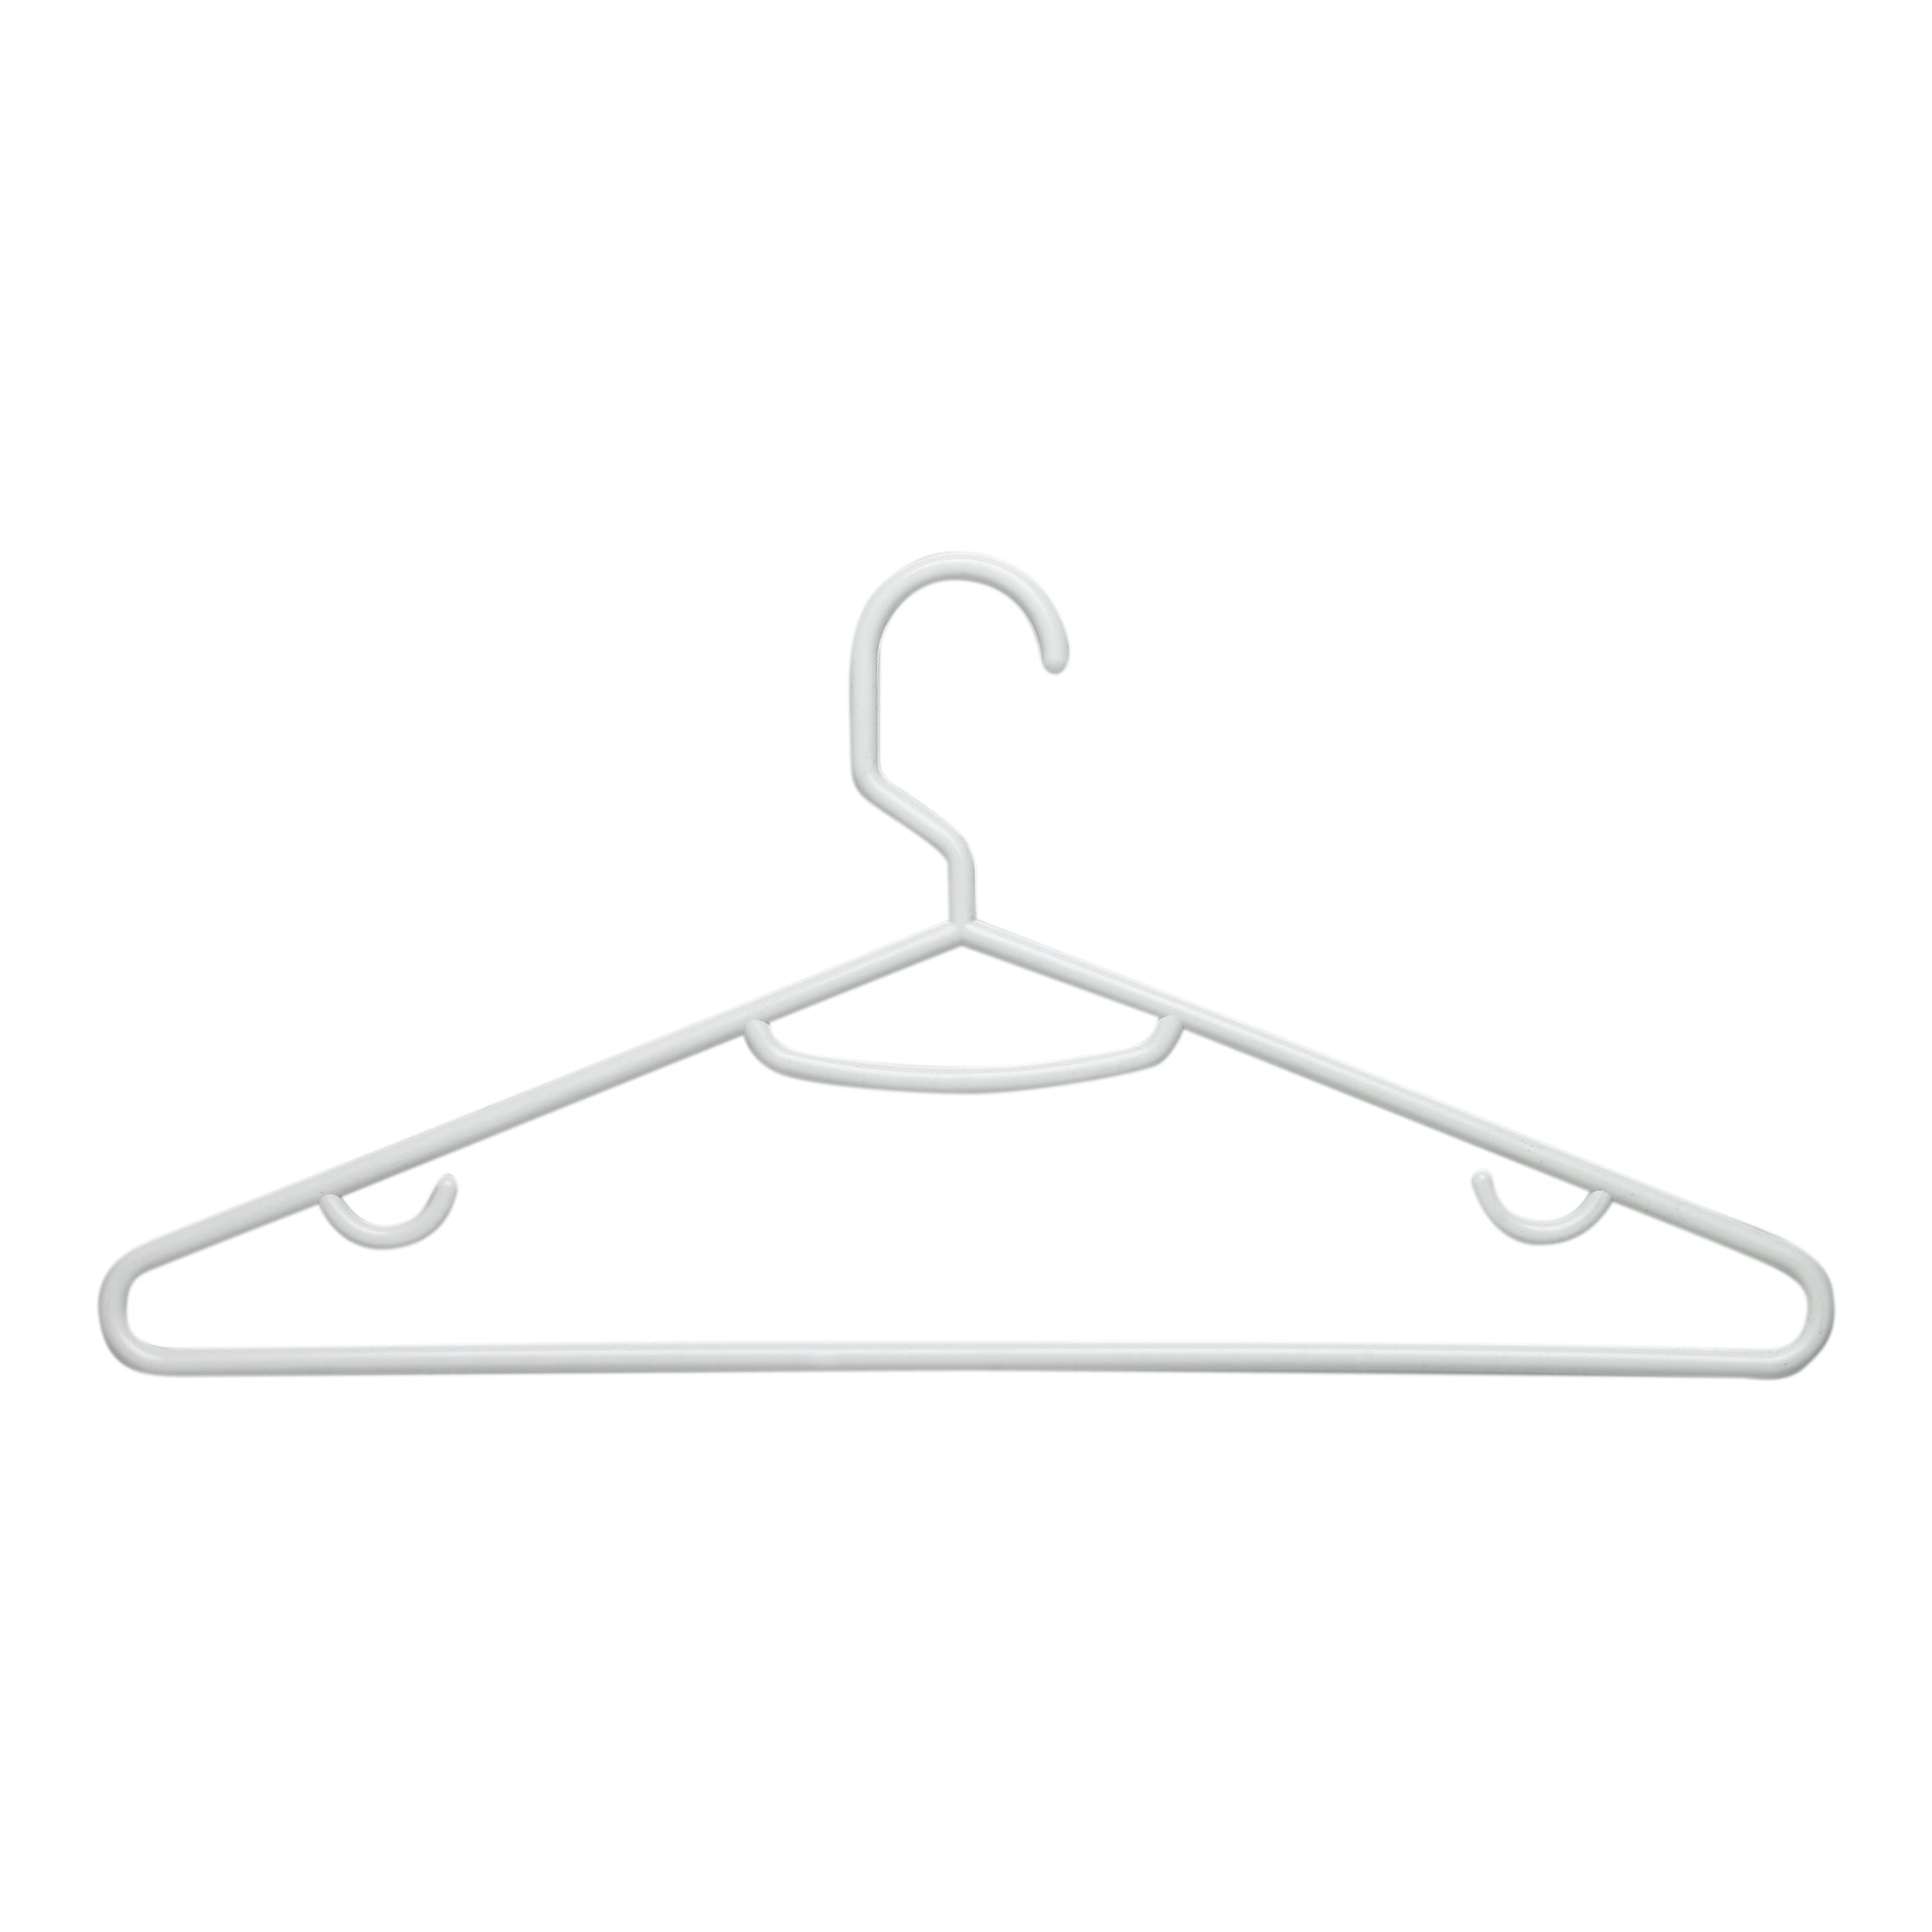 Market99 Transparent Heavy Duty Plastic Hangers, Plastic Clothes Hangers  Ideal for Everyday Use, Clothing Standard Hangers, Set Of 10 pcs :  Amazon.in: Home & Kitchen